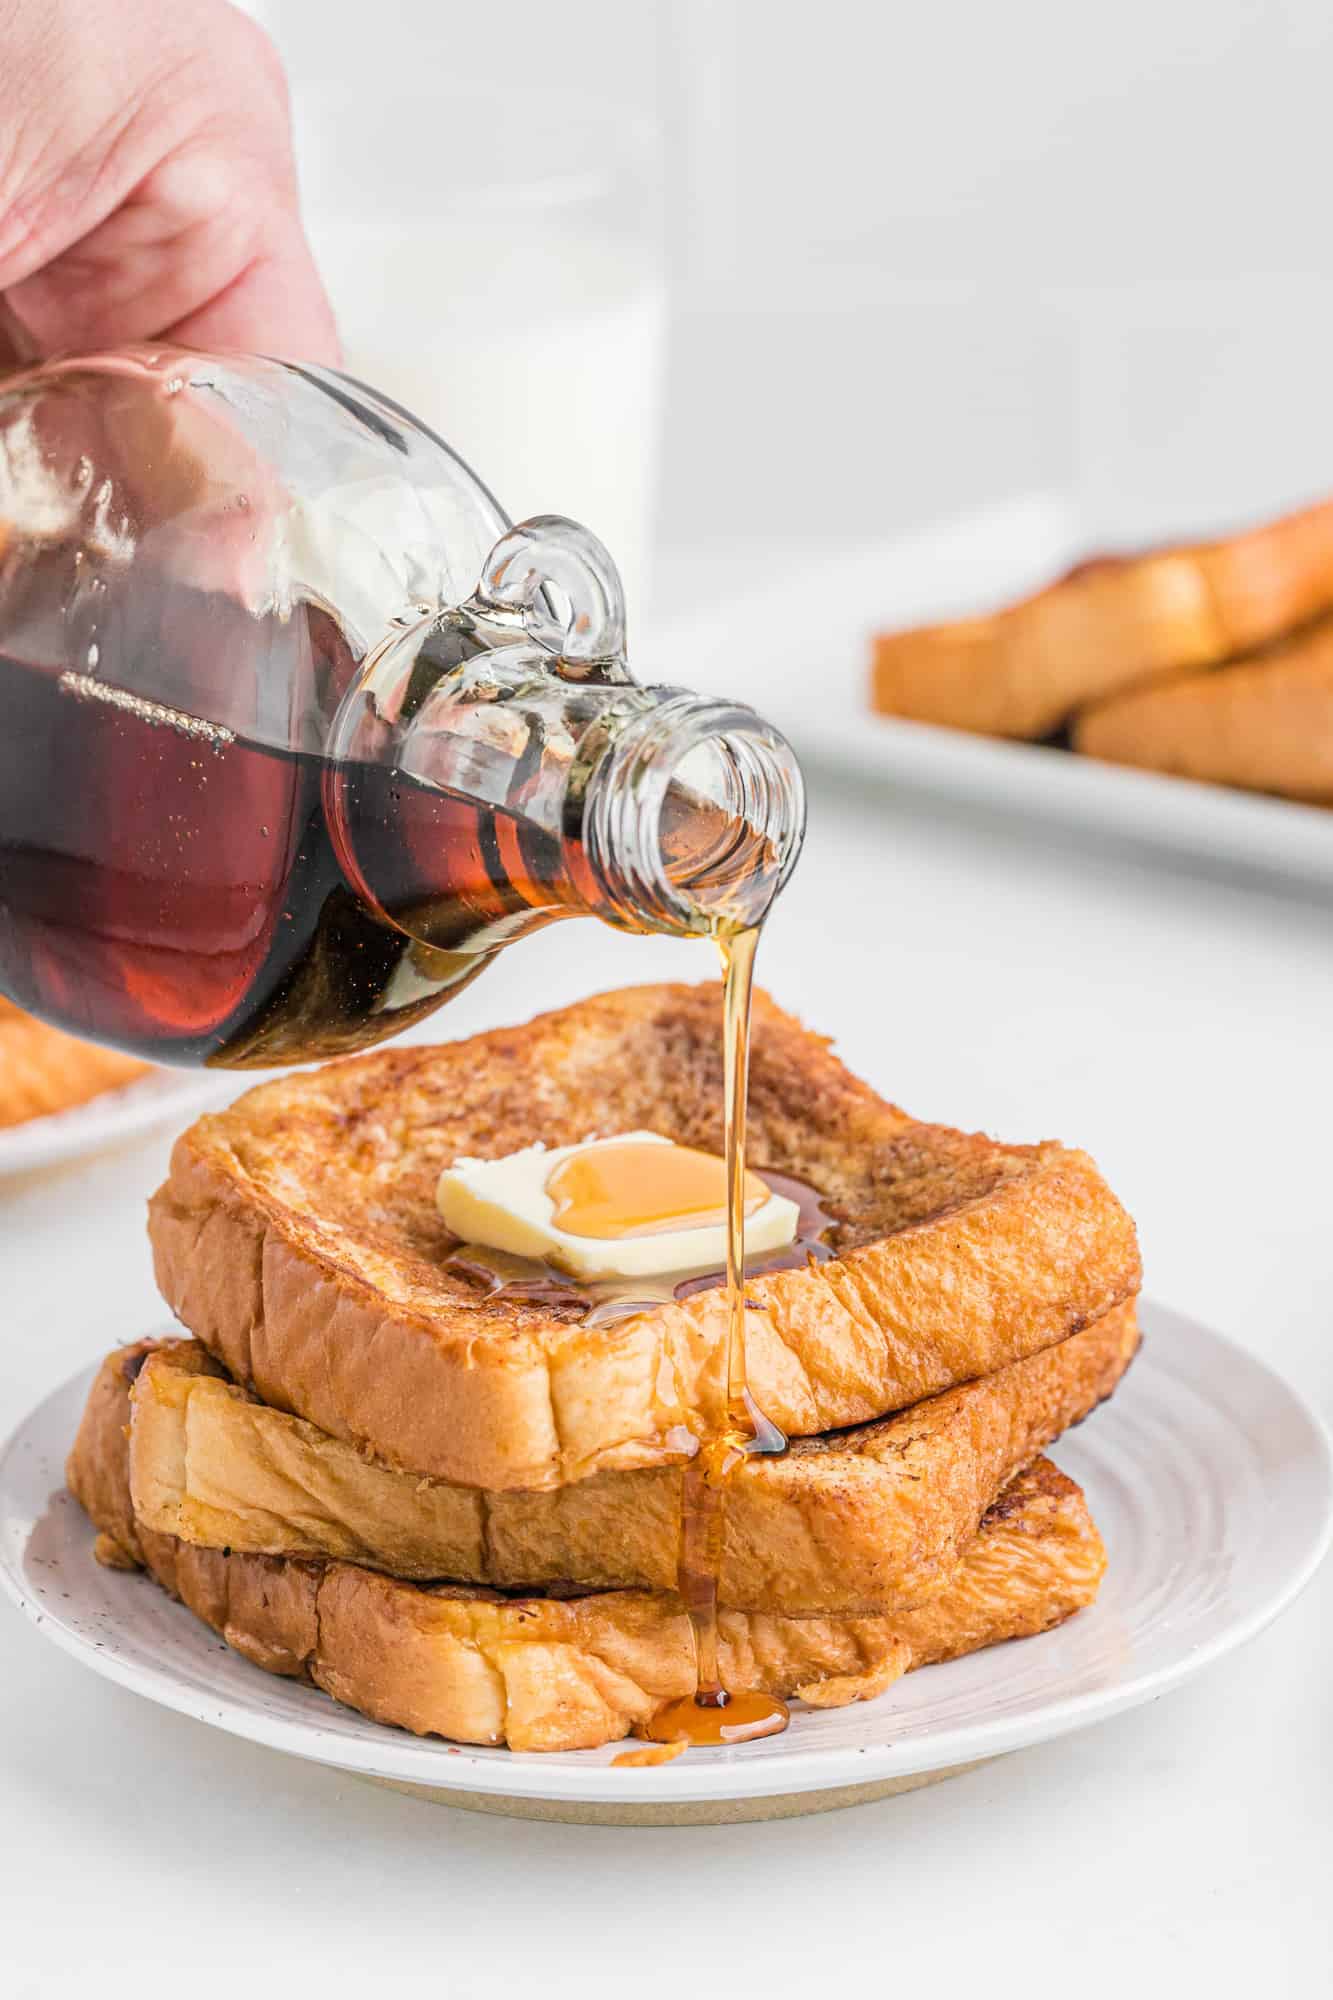 Syrup being poured on stack of french toast.